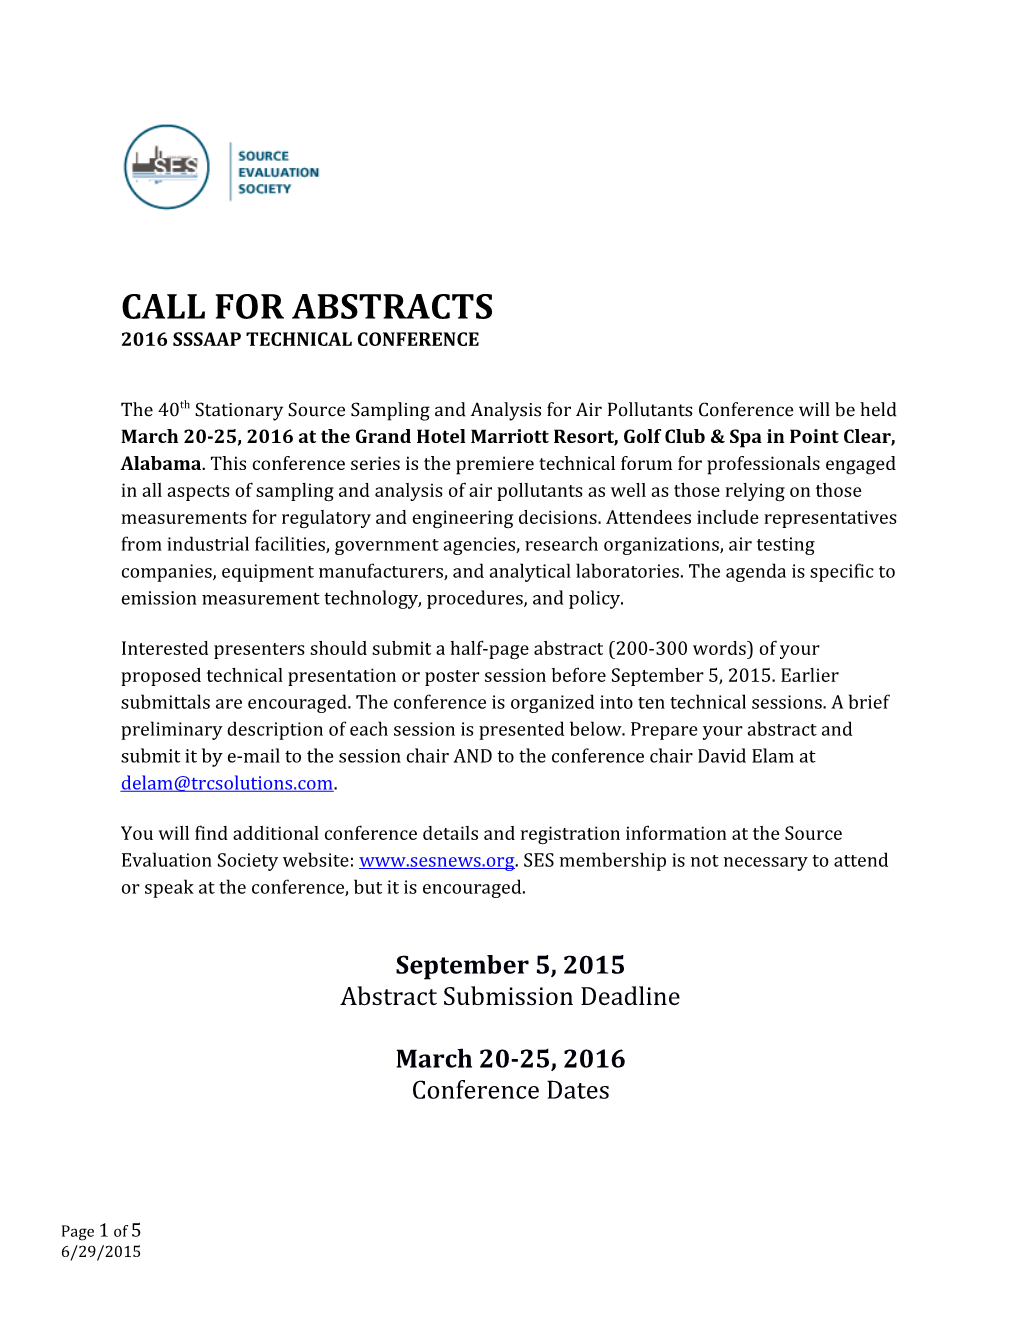 Call for Abstracts s2